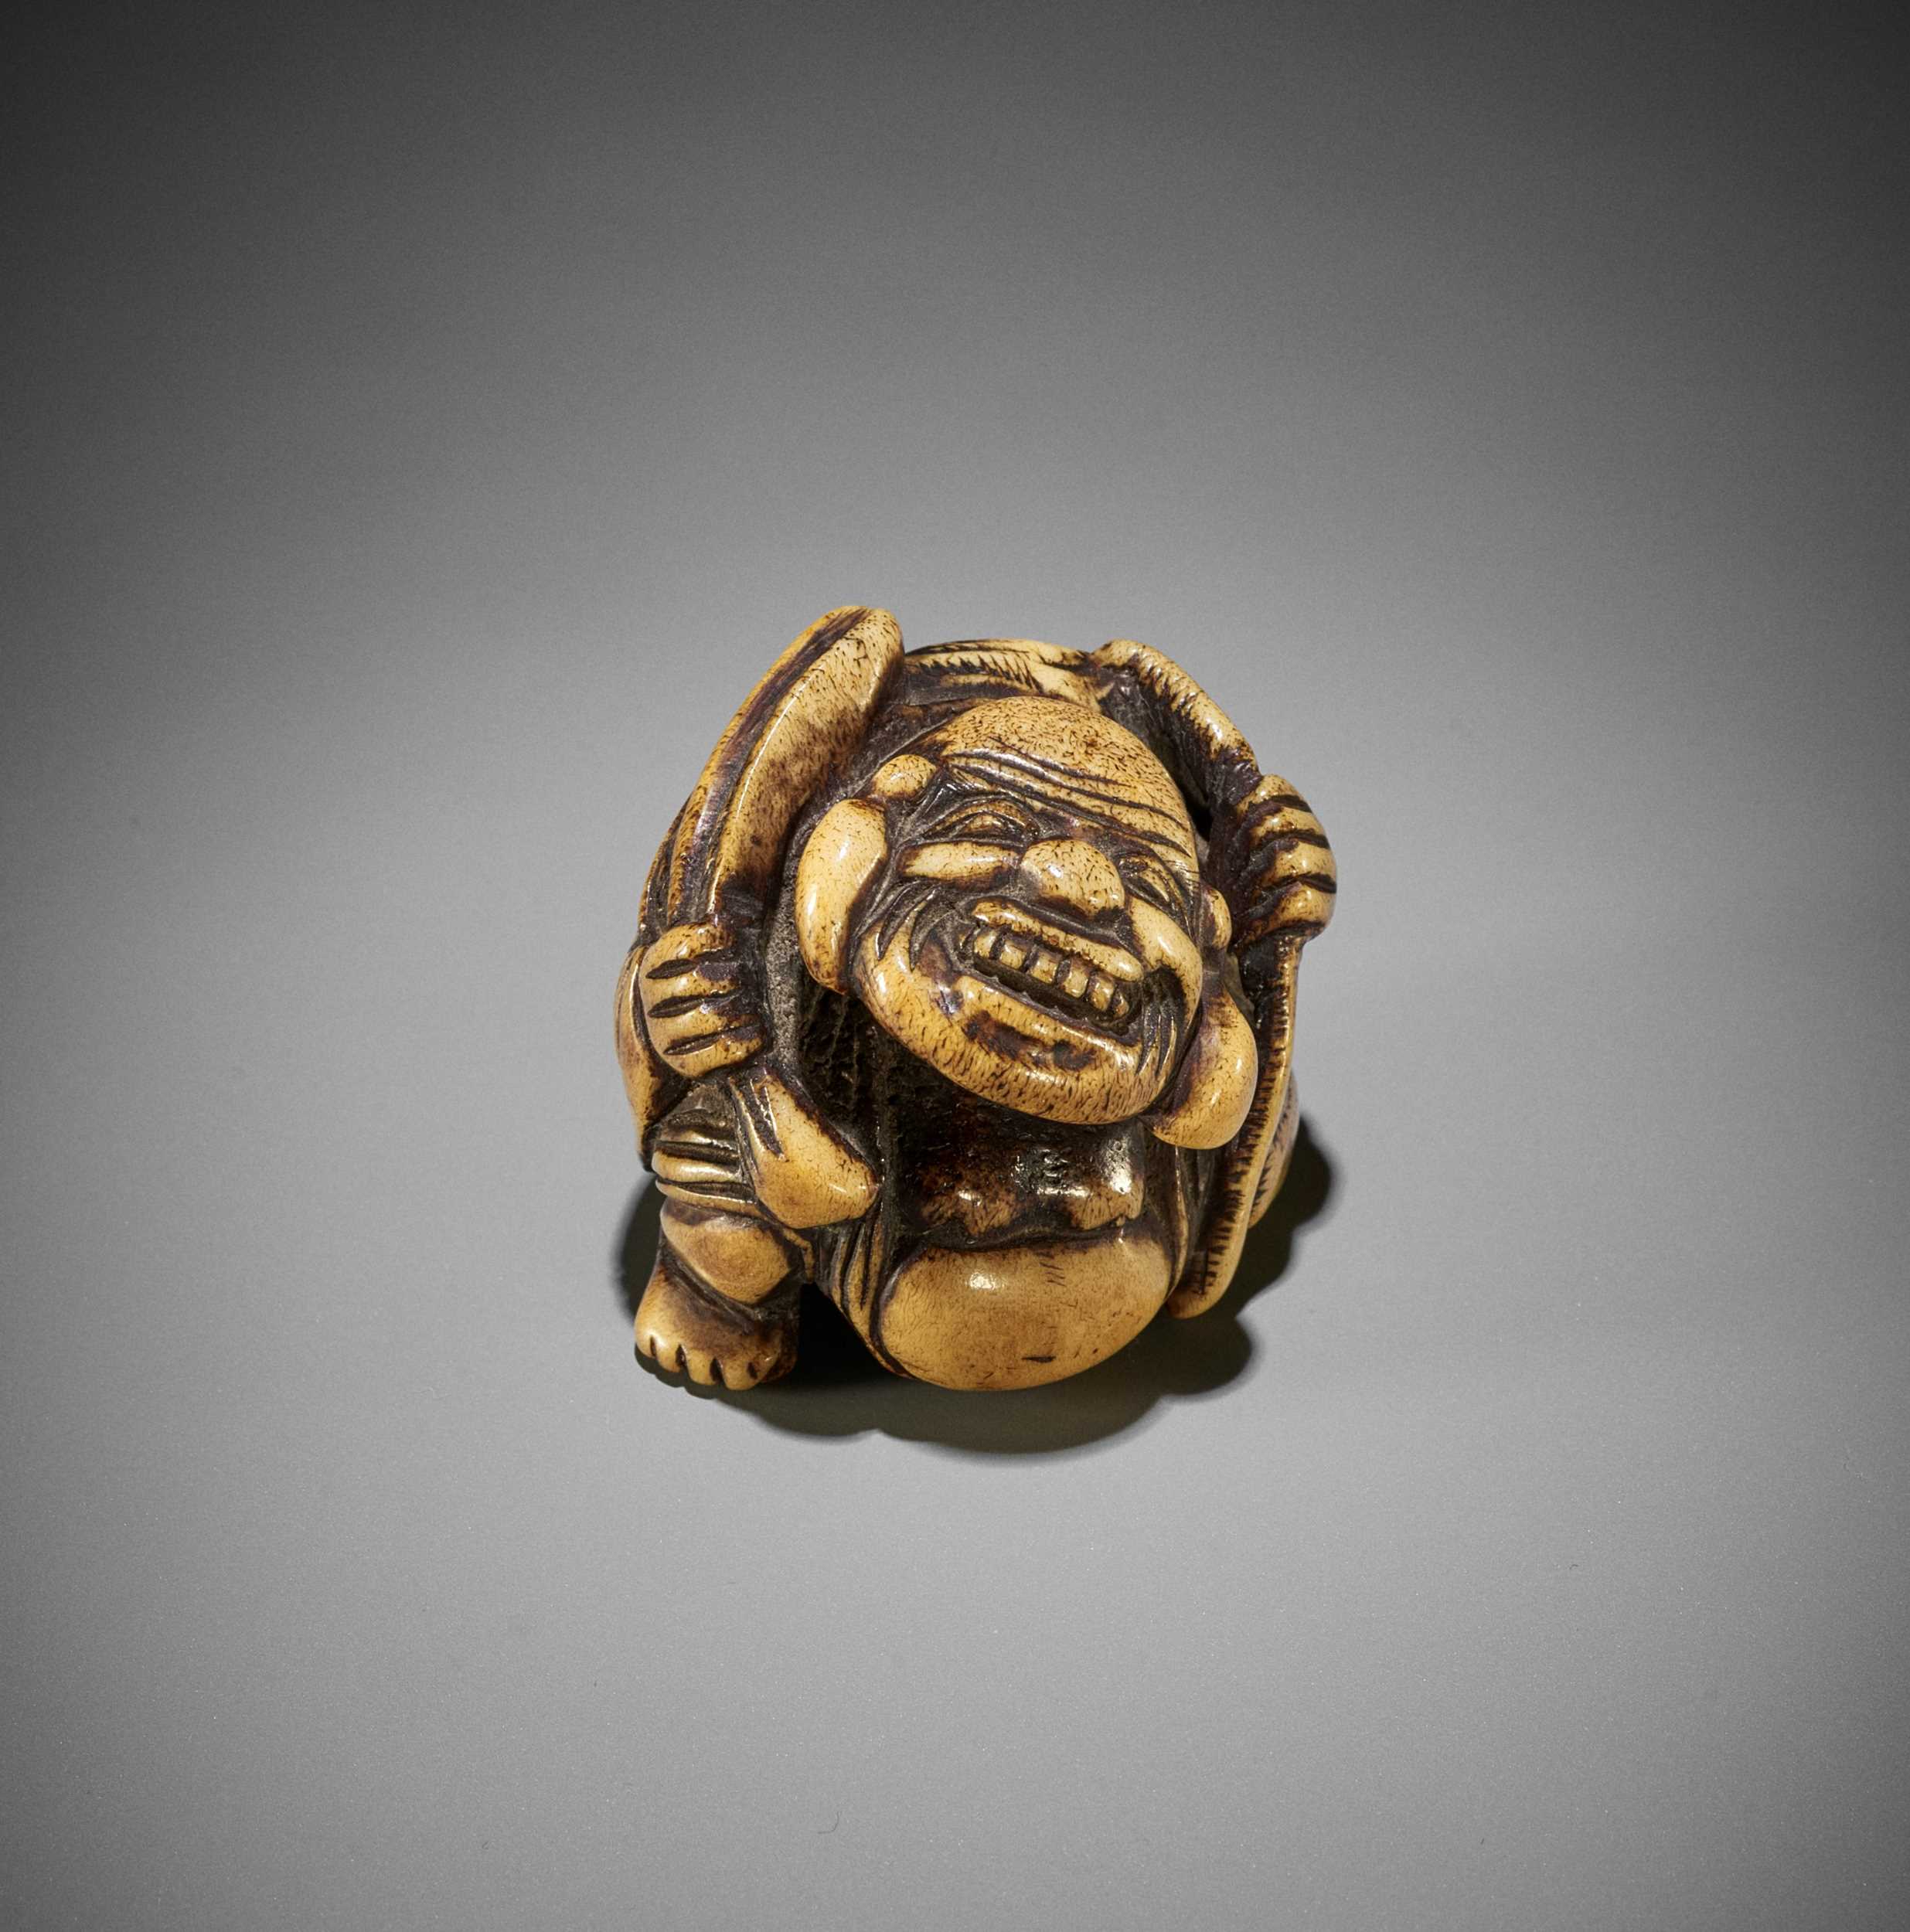 A SUPERB STAG ANTLER NETSUKE OF HOTEI